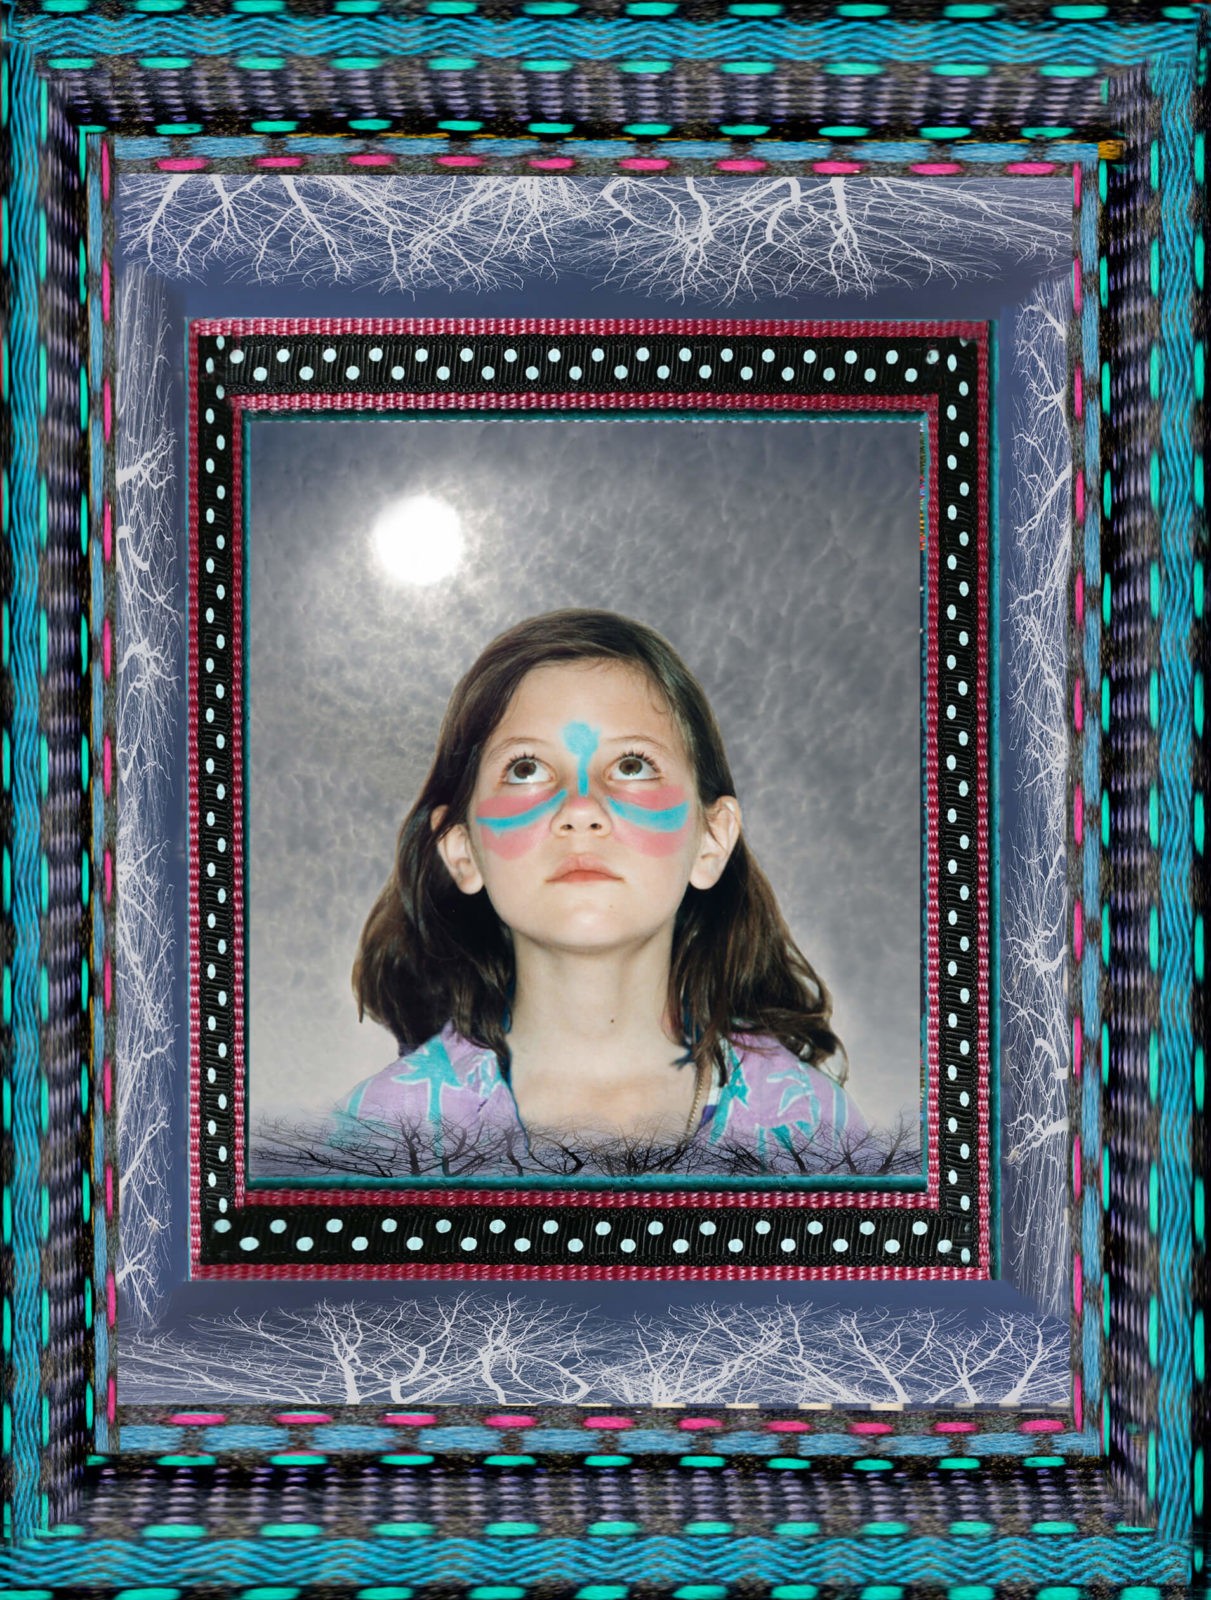 Robin Botie of Ithaca, New York, Photoshops multiple frames around a portrait of her daughter Marika Warden who died.